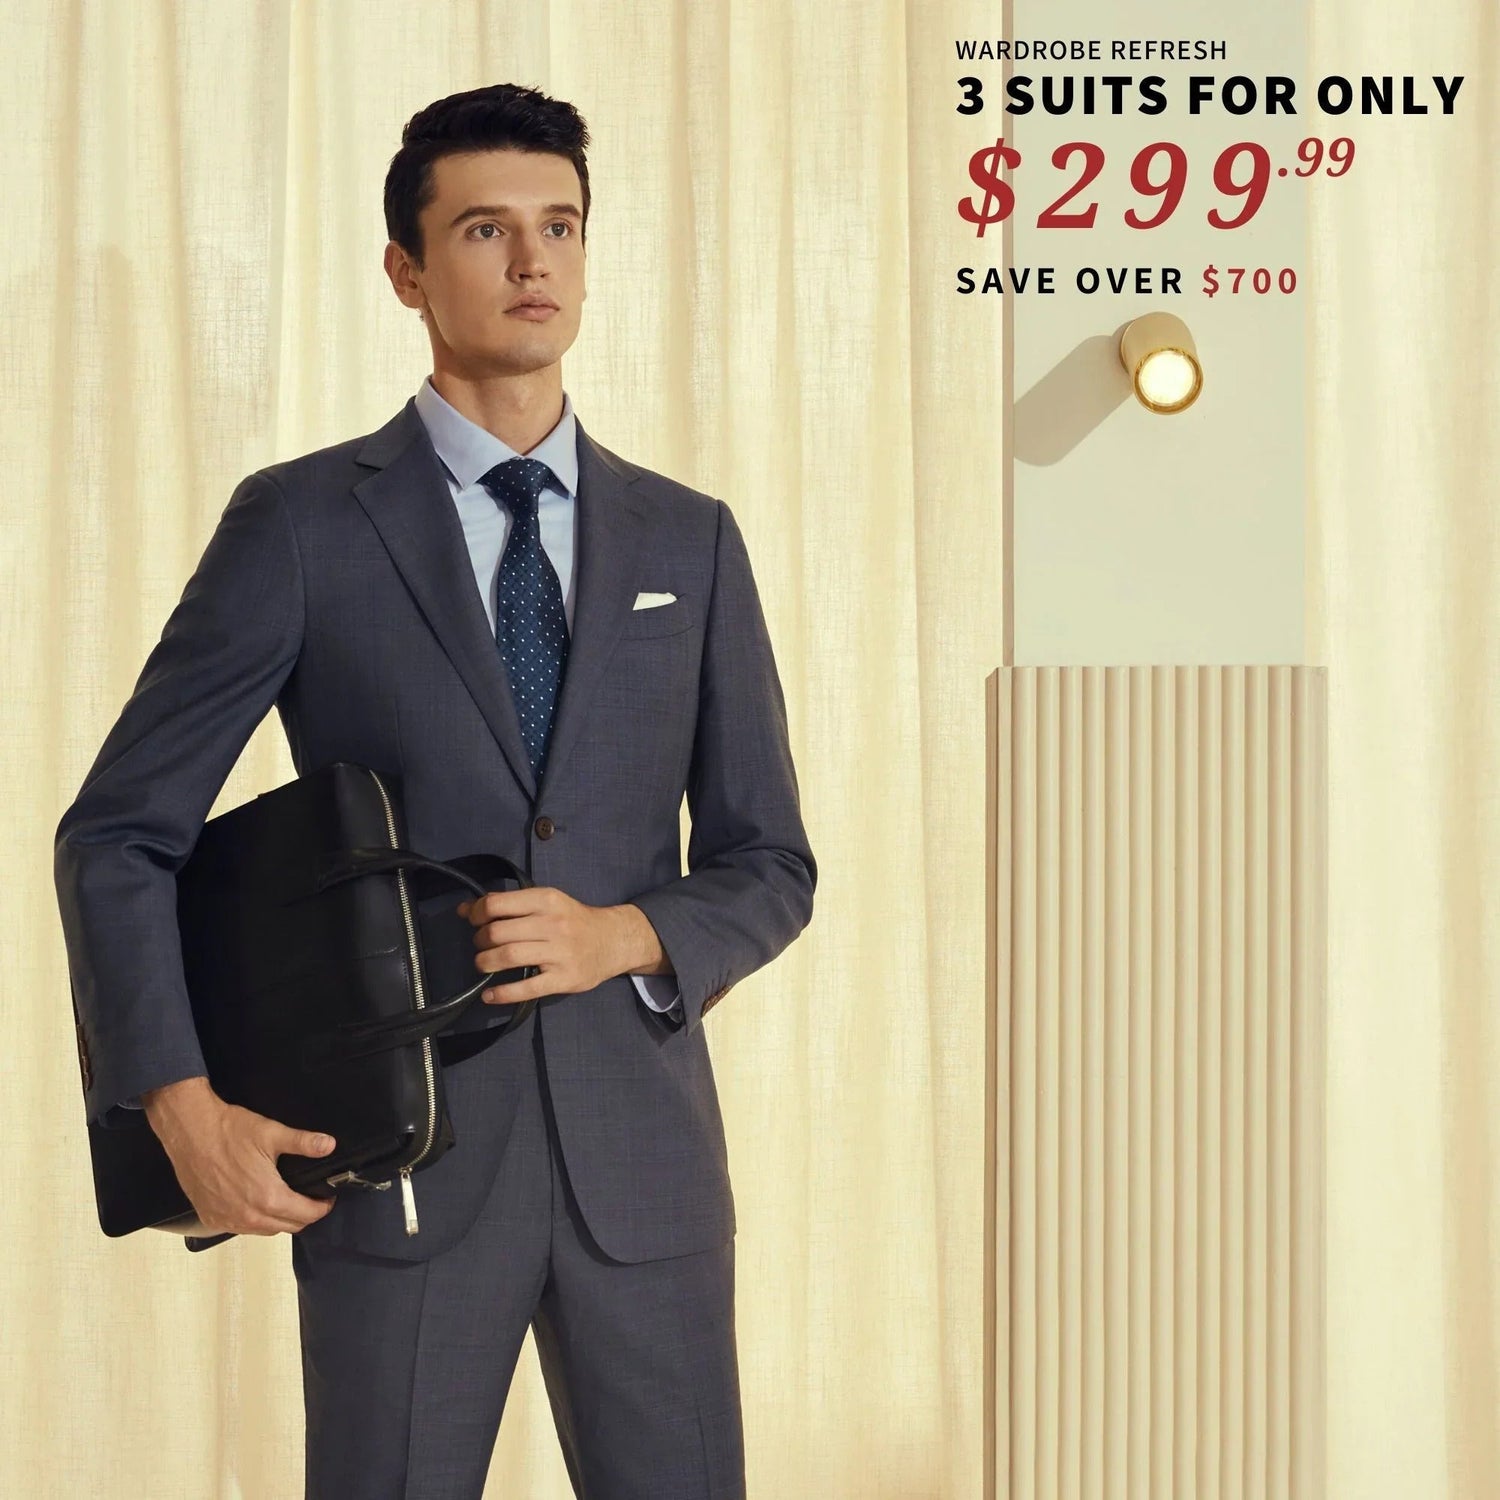 A man in a BYOB suit holding a briefcase, available online only.